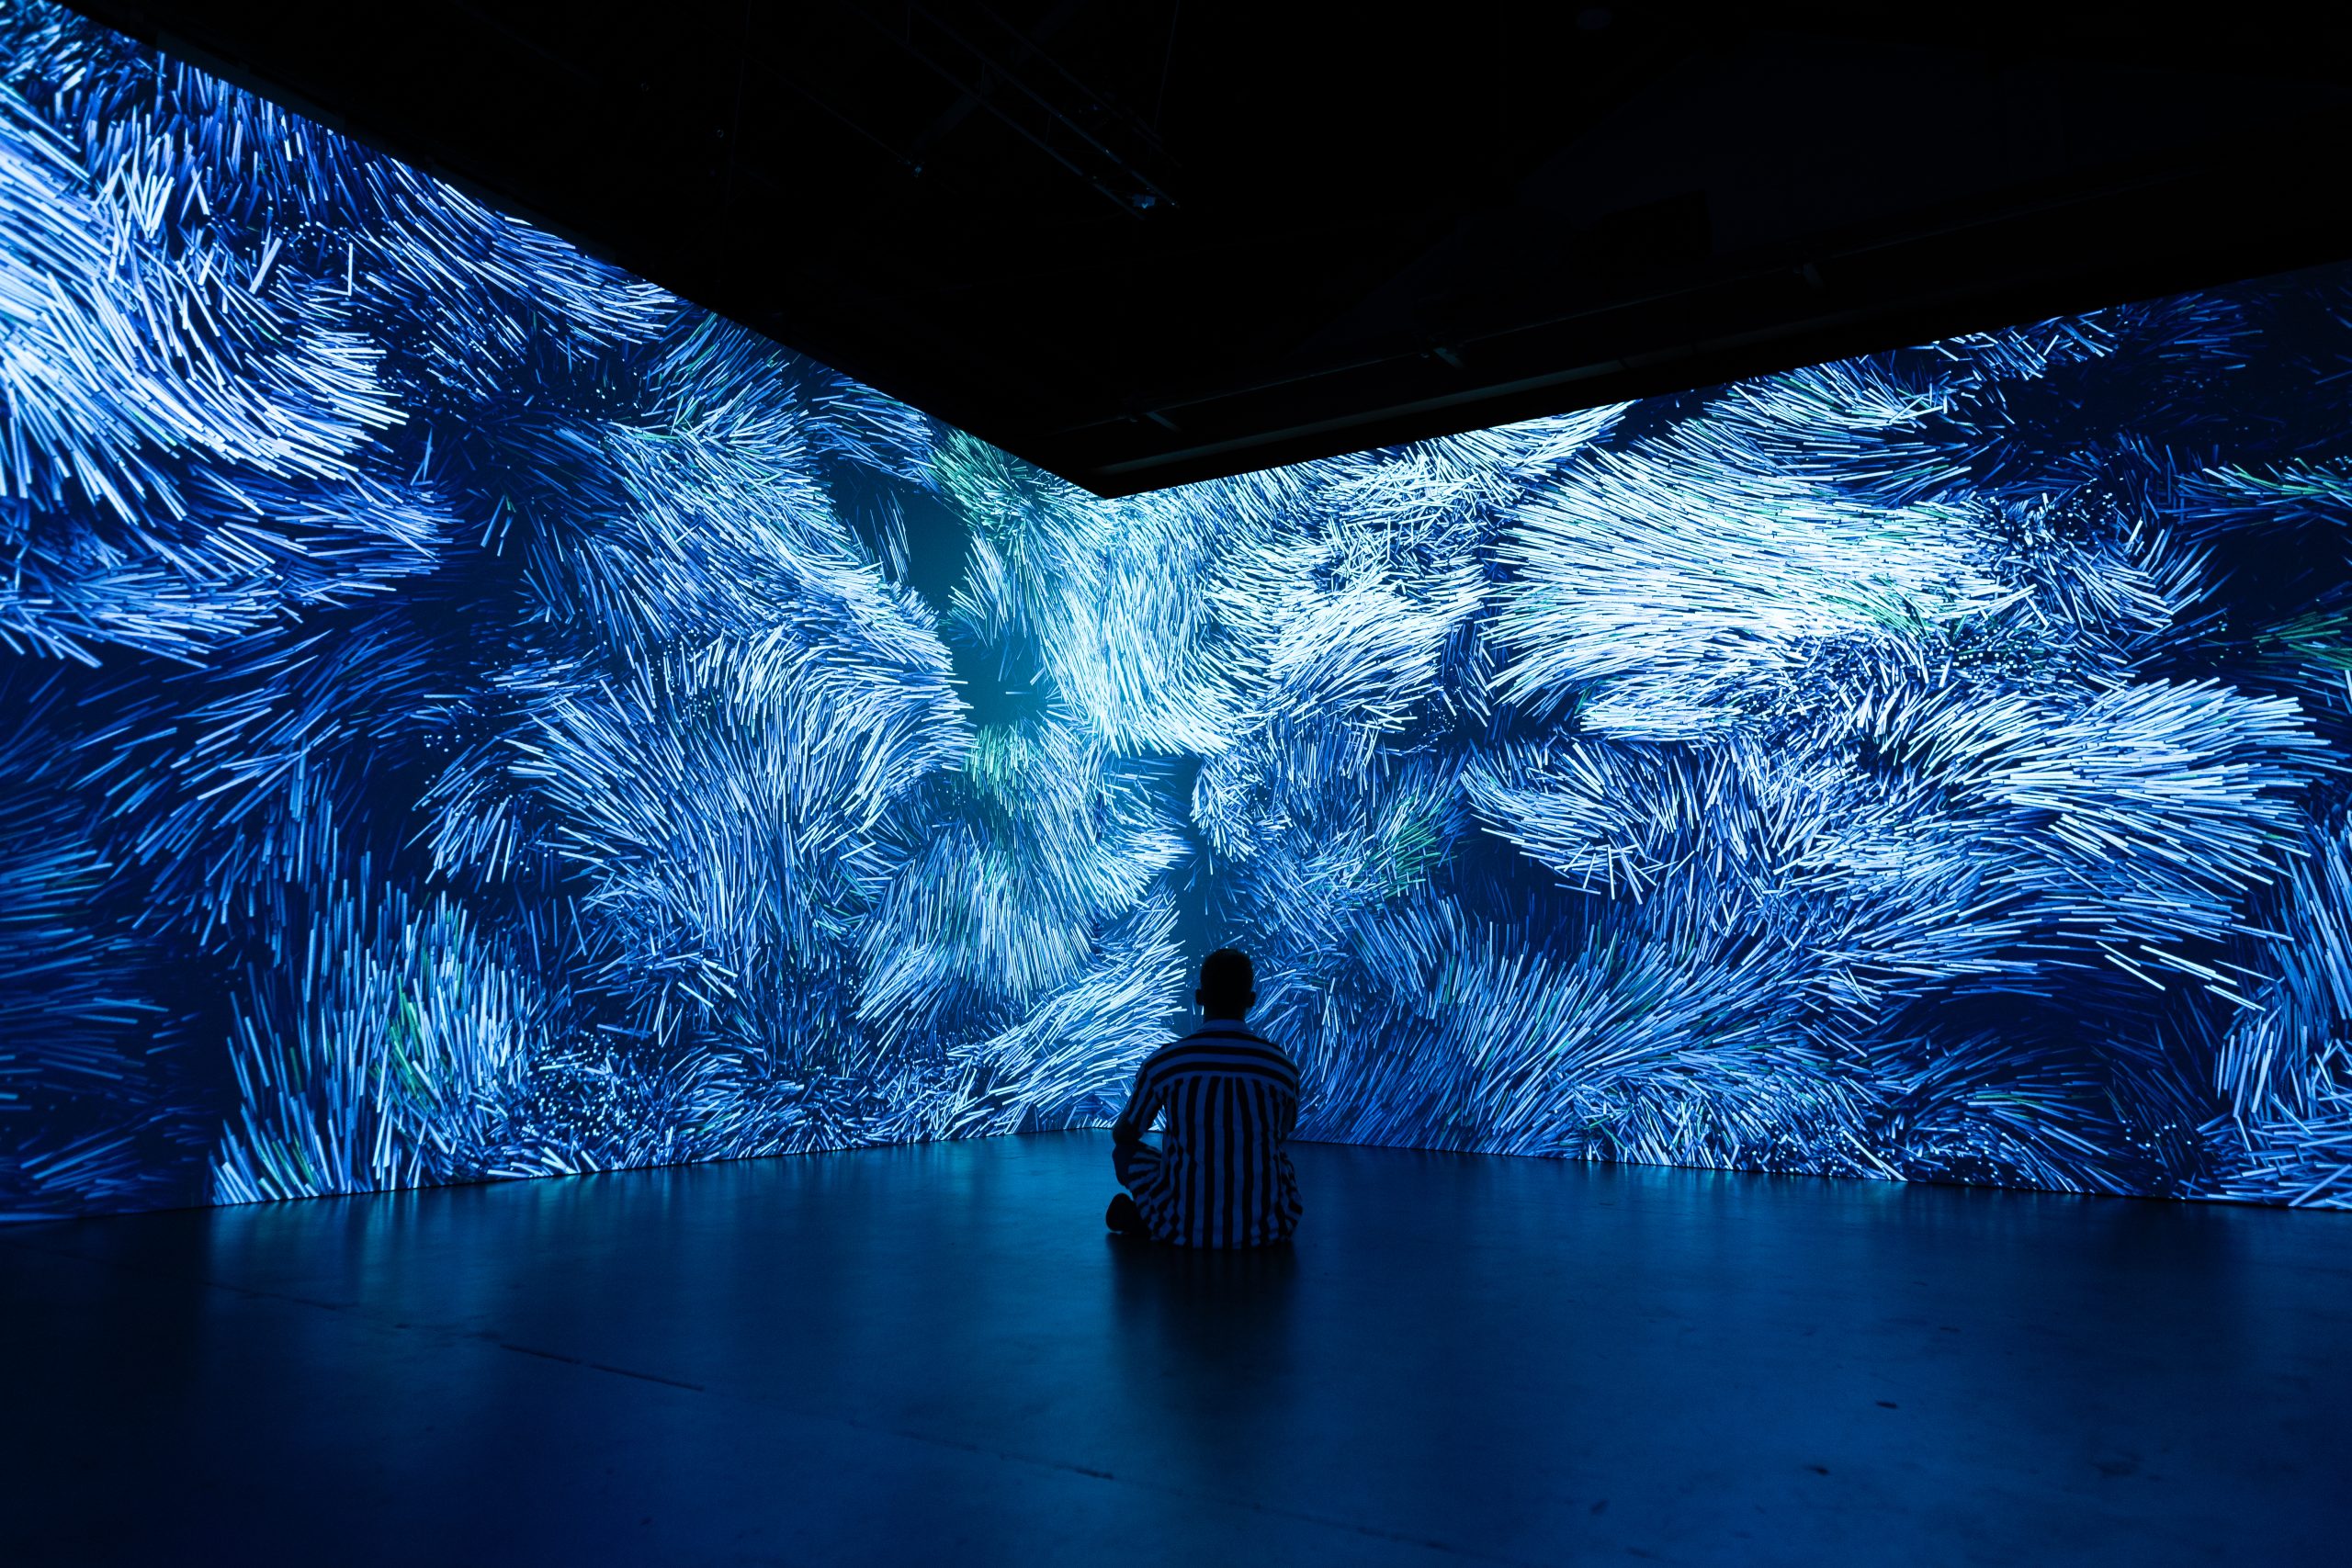 Shadow of figure sitting down in front of two wall size projected images of an abstract image of thousands of blue coloured lines